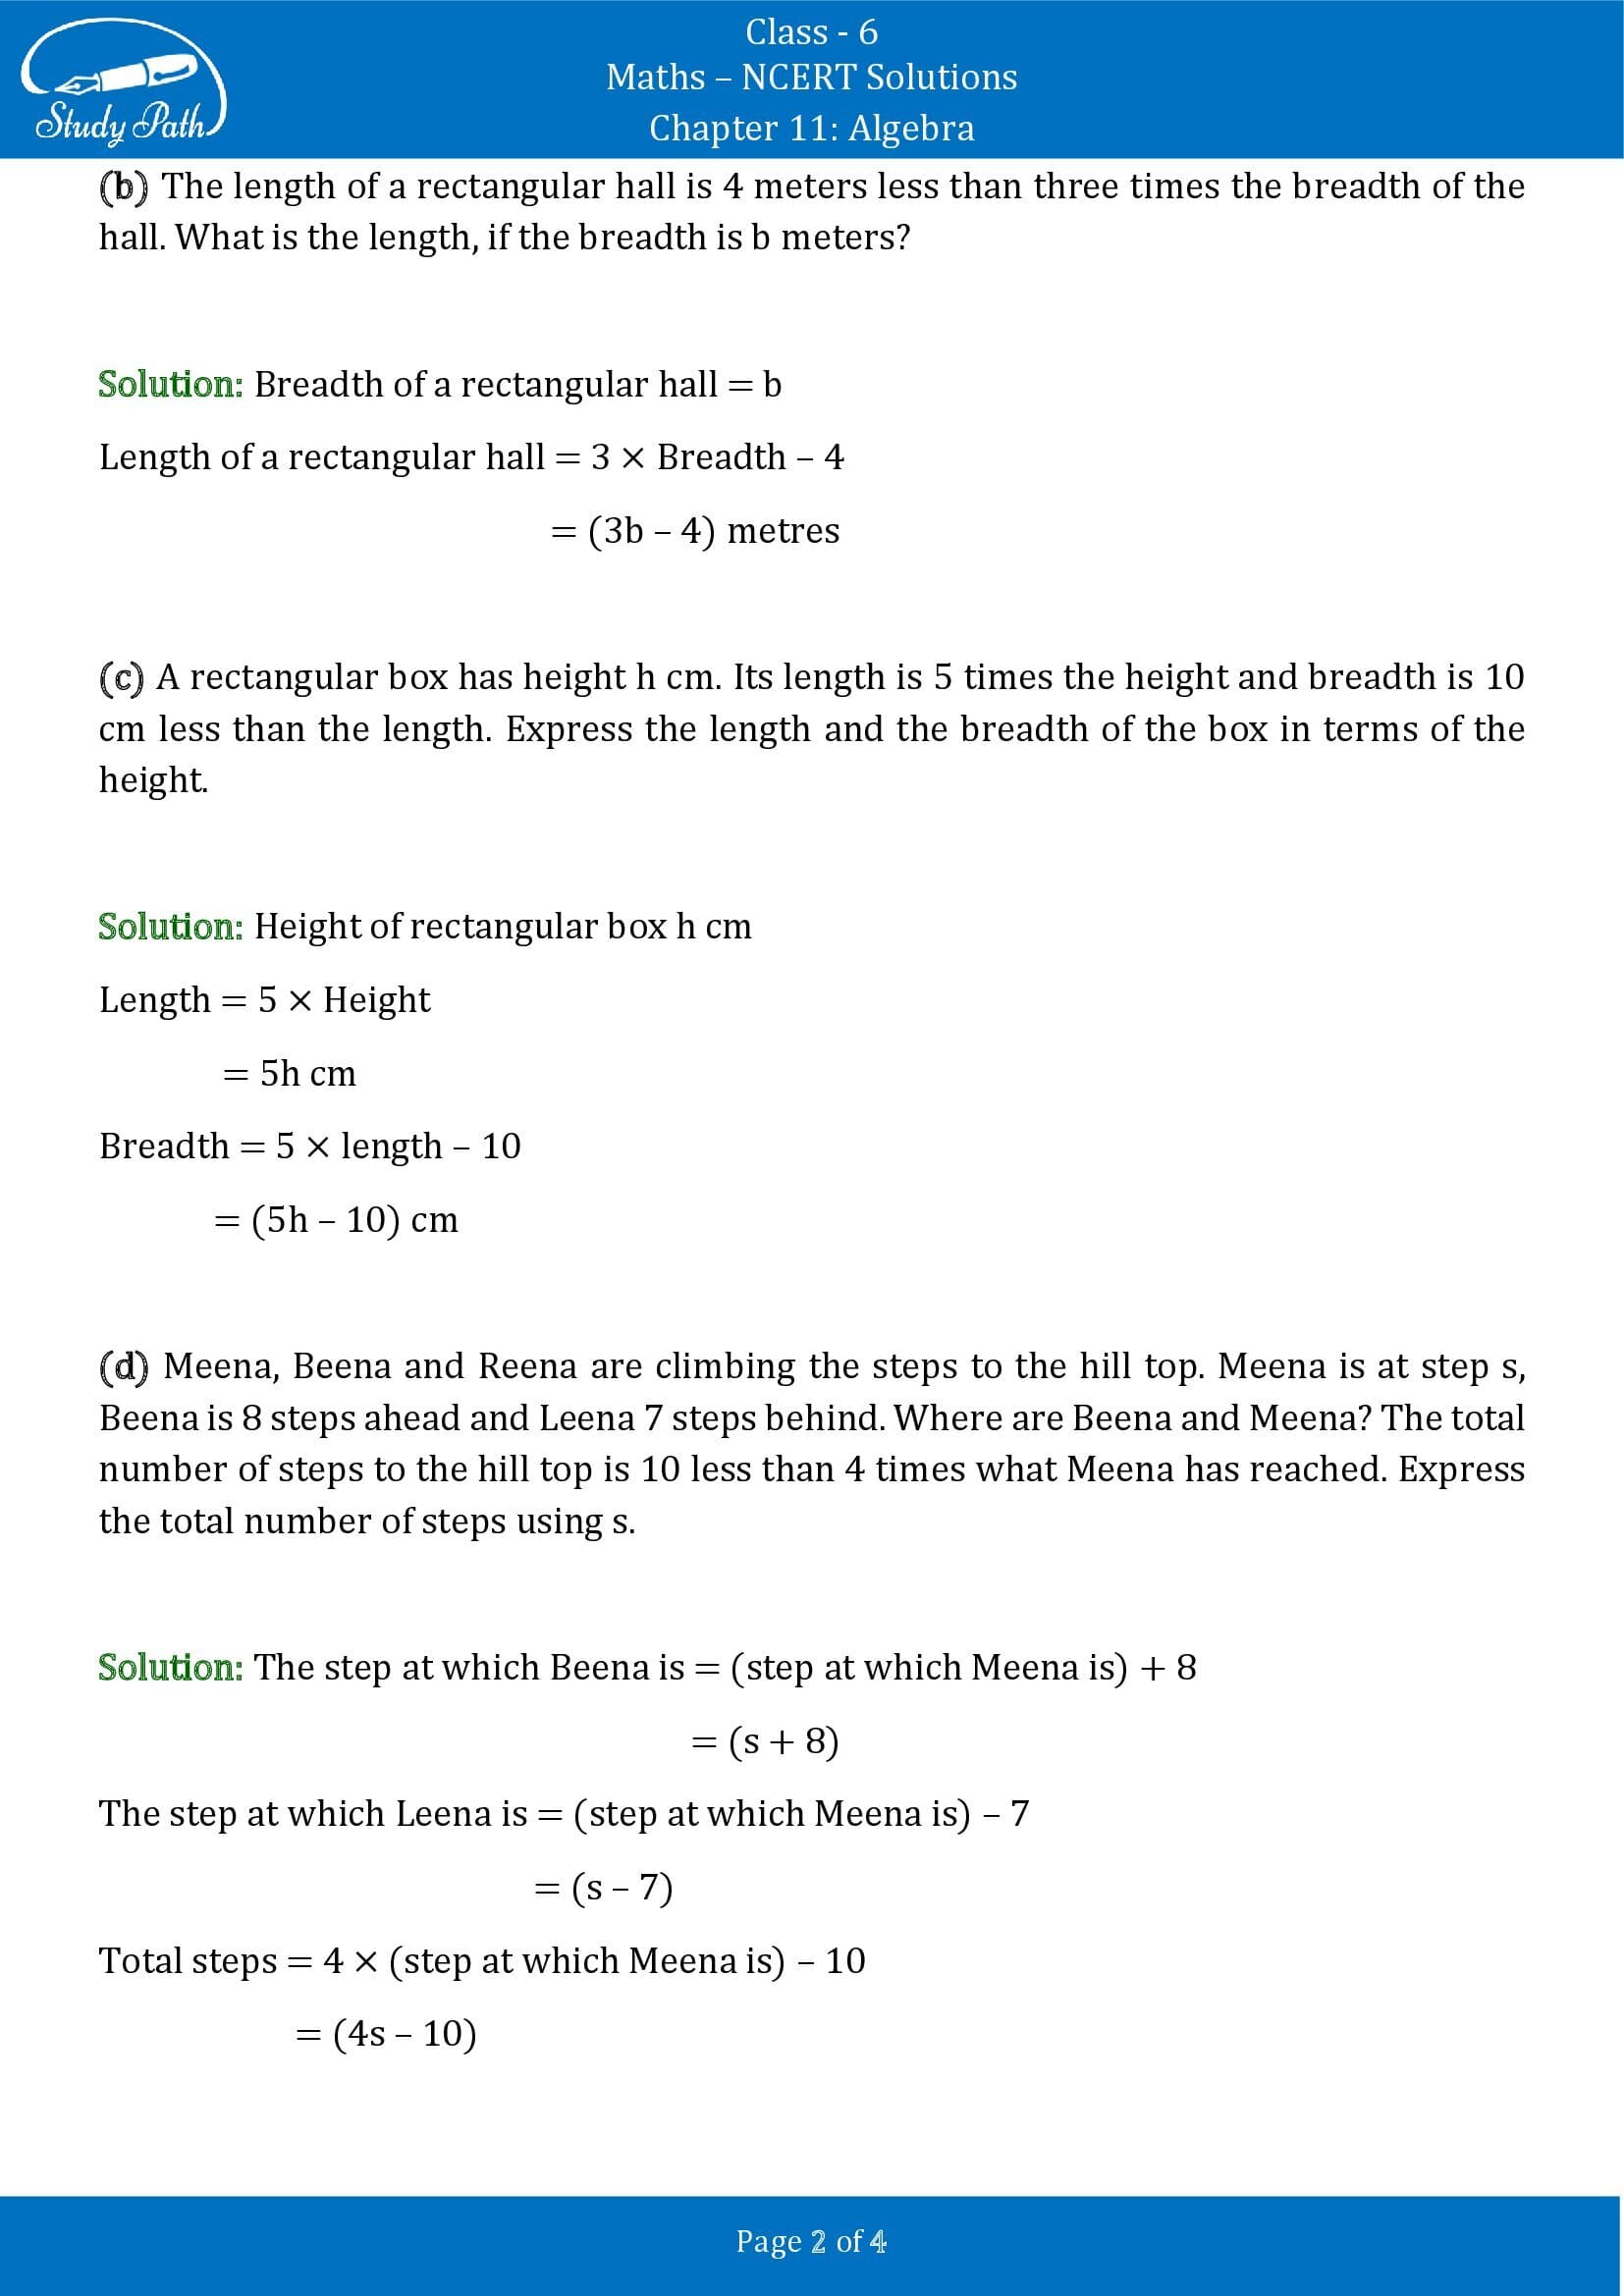 NCERT Solutions for Class 6 Maths Chapter 11 Algebra Exercise 11.4 00002